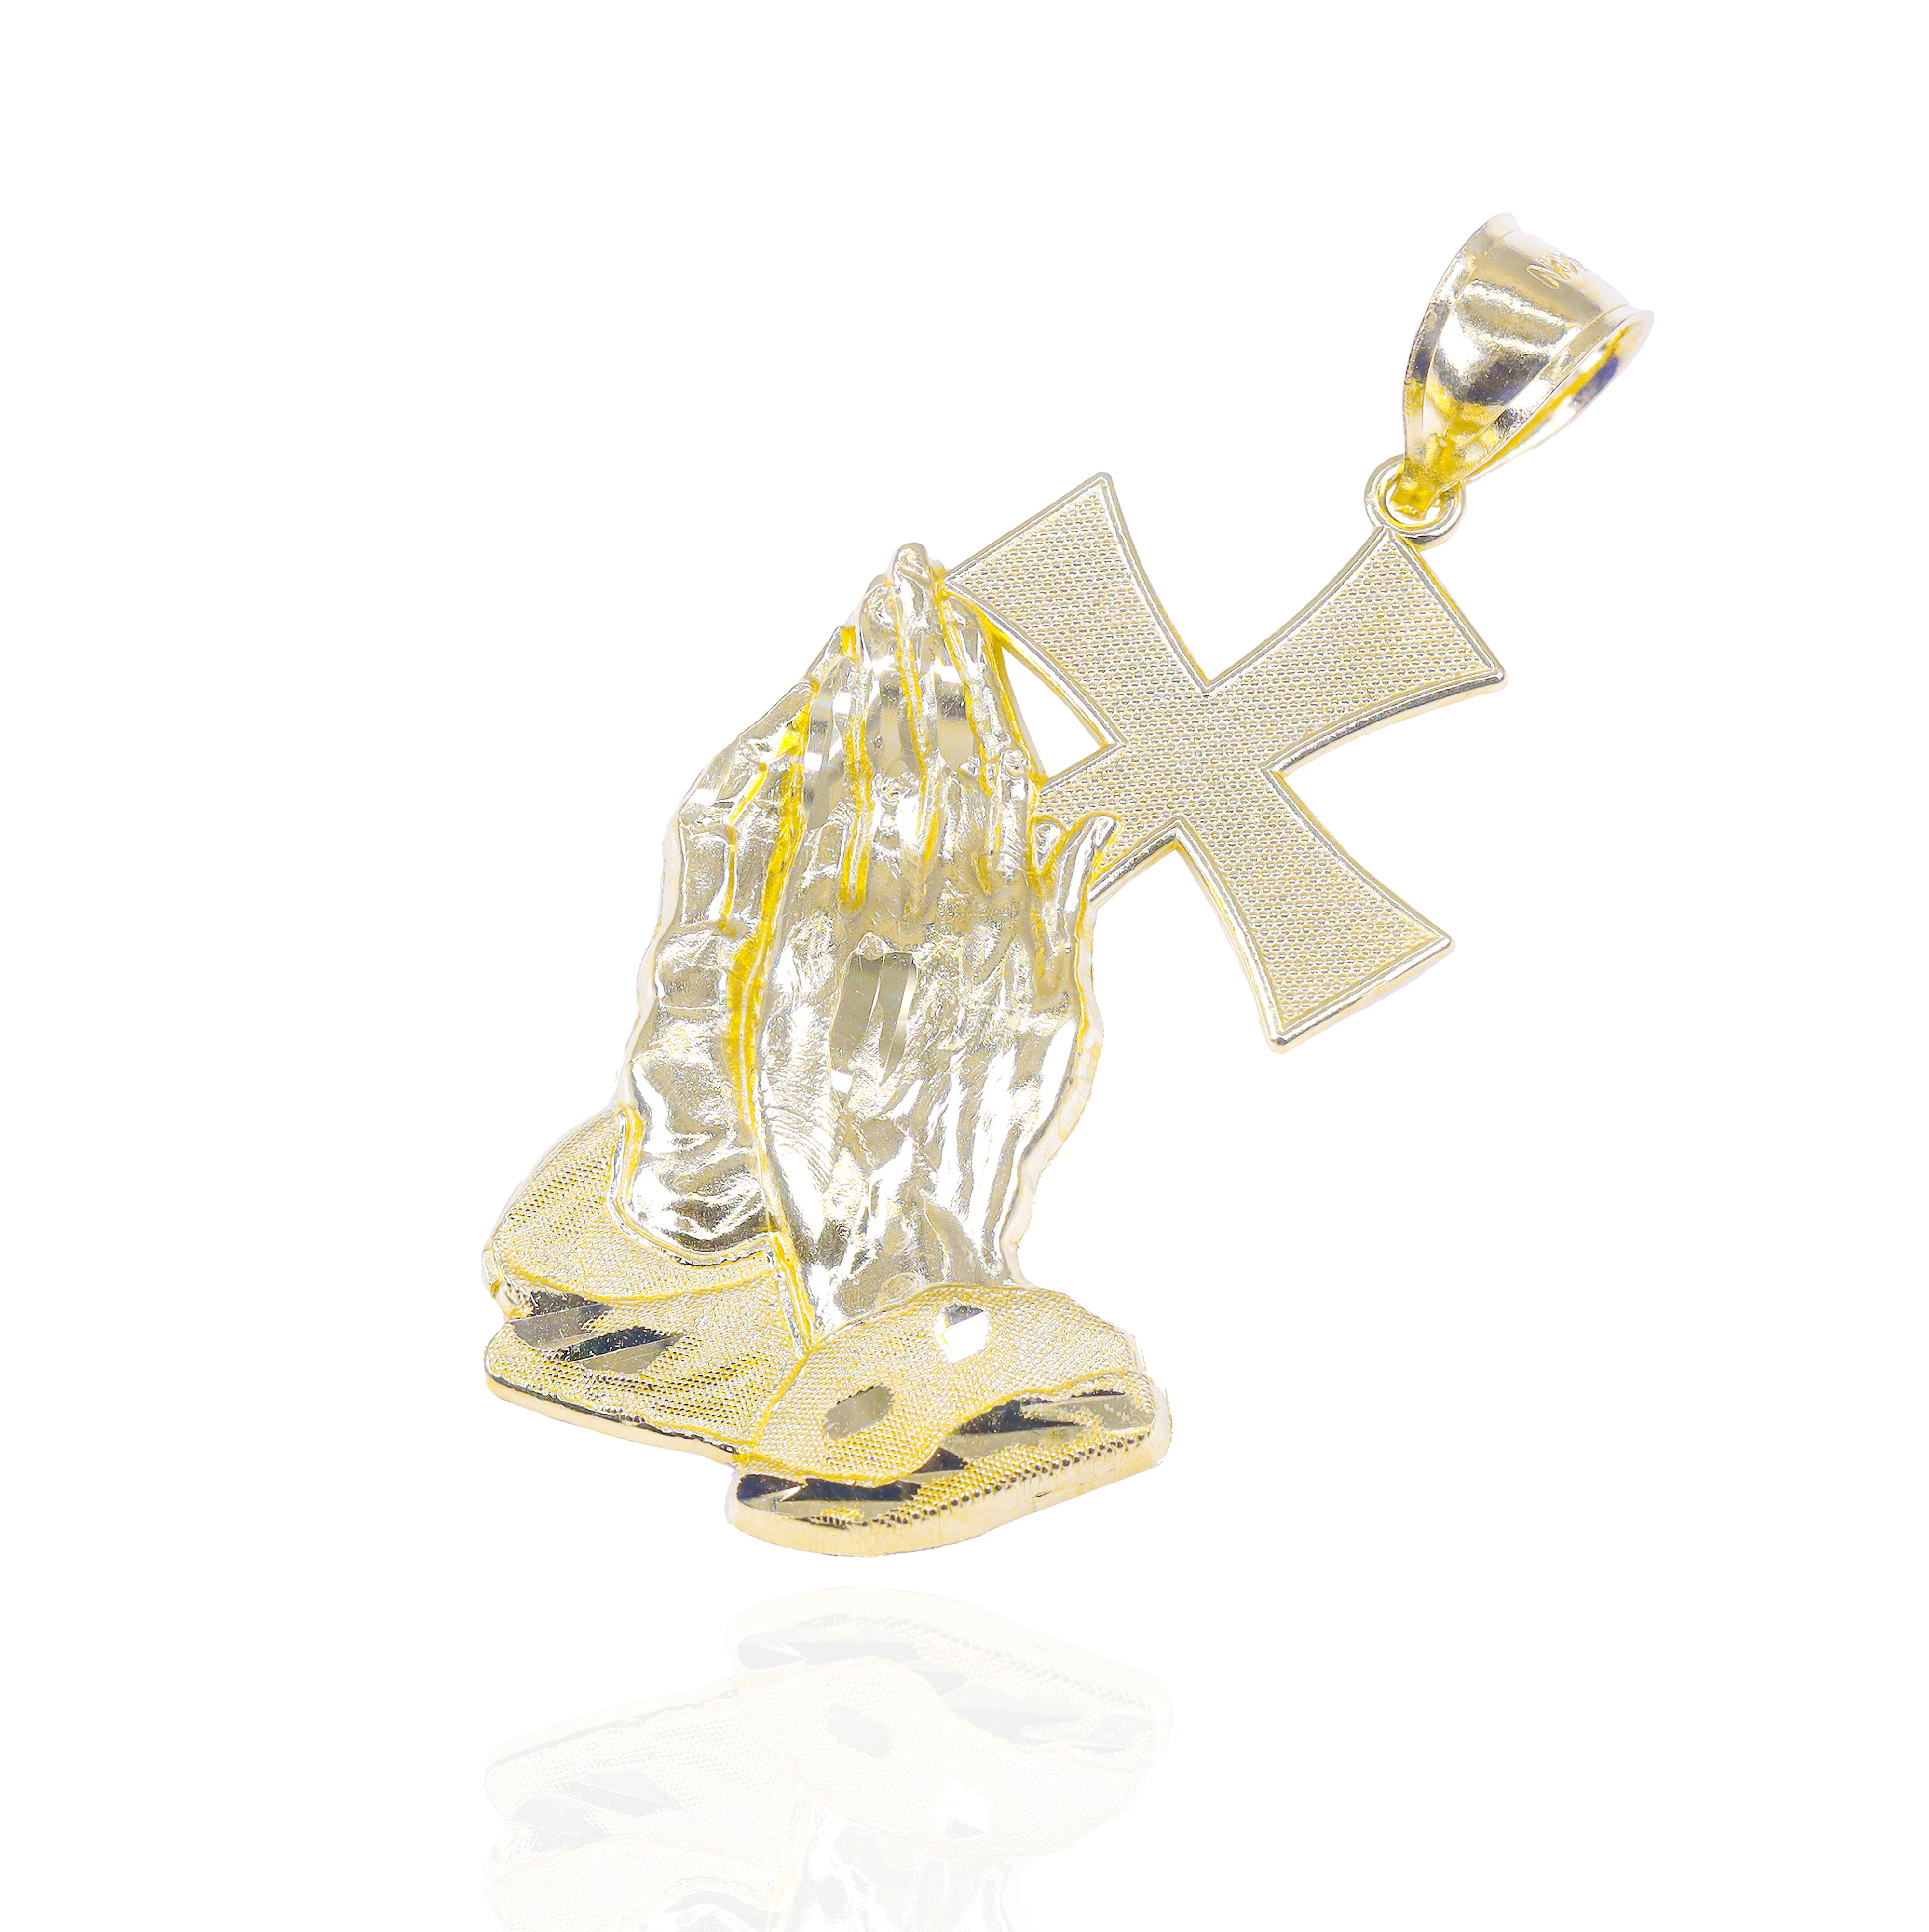 10KT Solid Gold Praying Hands Holding Cross Pendant